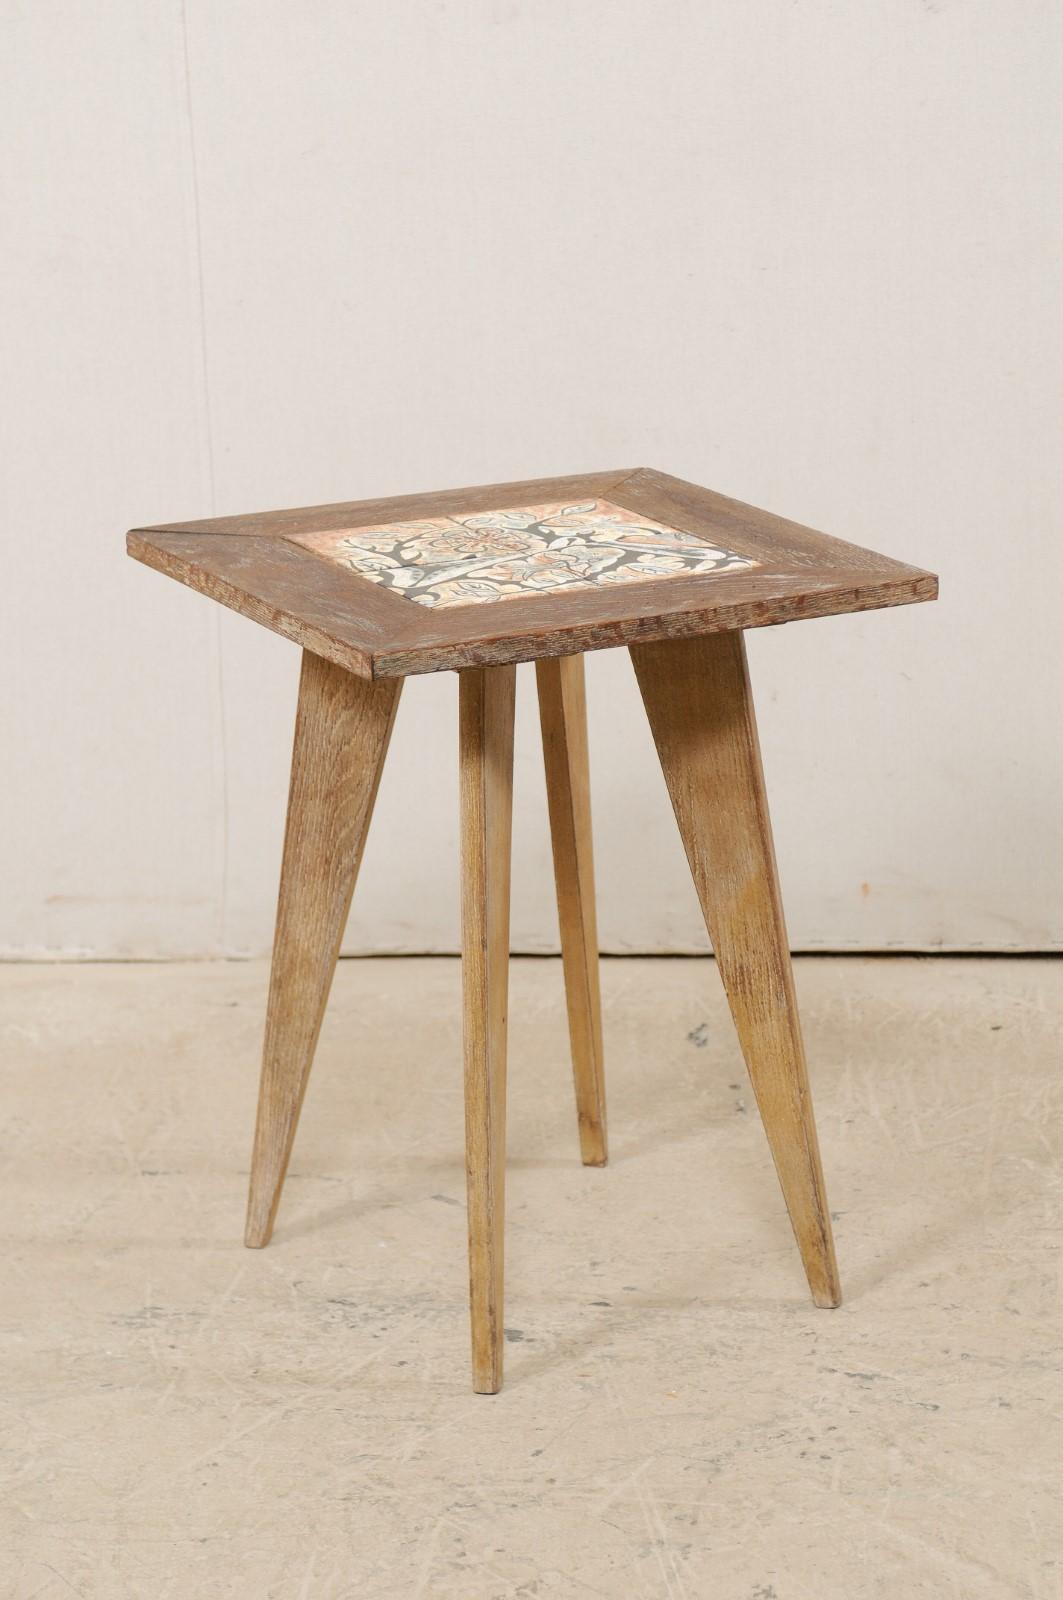 A 1960s American side table with artisan tile top attributed to painter and muralist Anton Refreiger (March 20, 1905-October 10, 1979) this vintage side table, with its 20